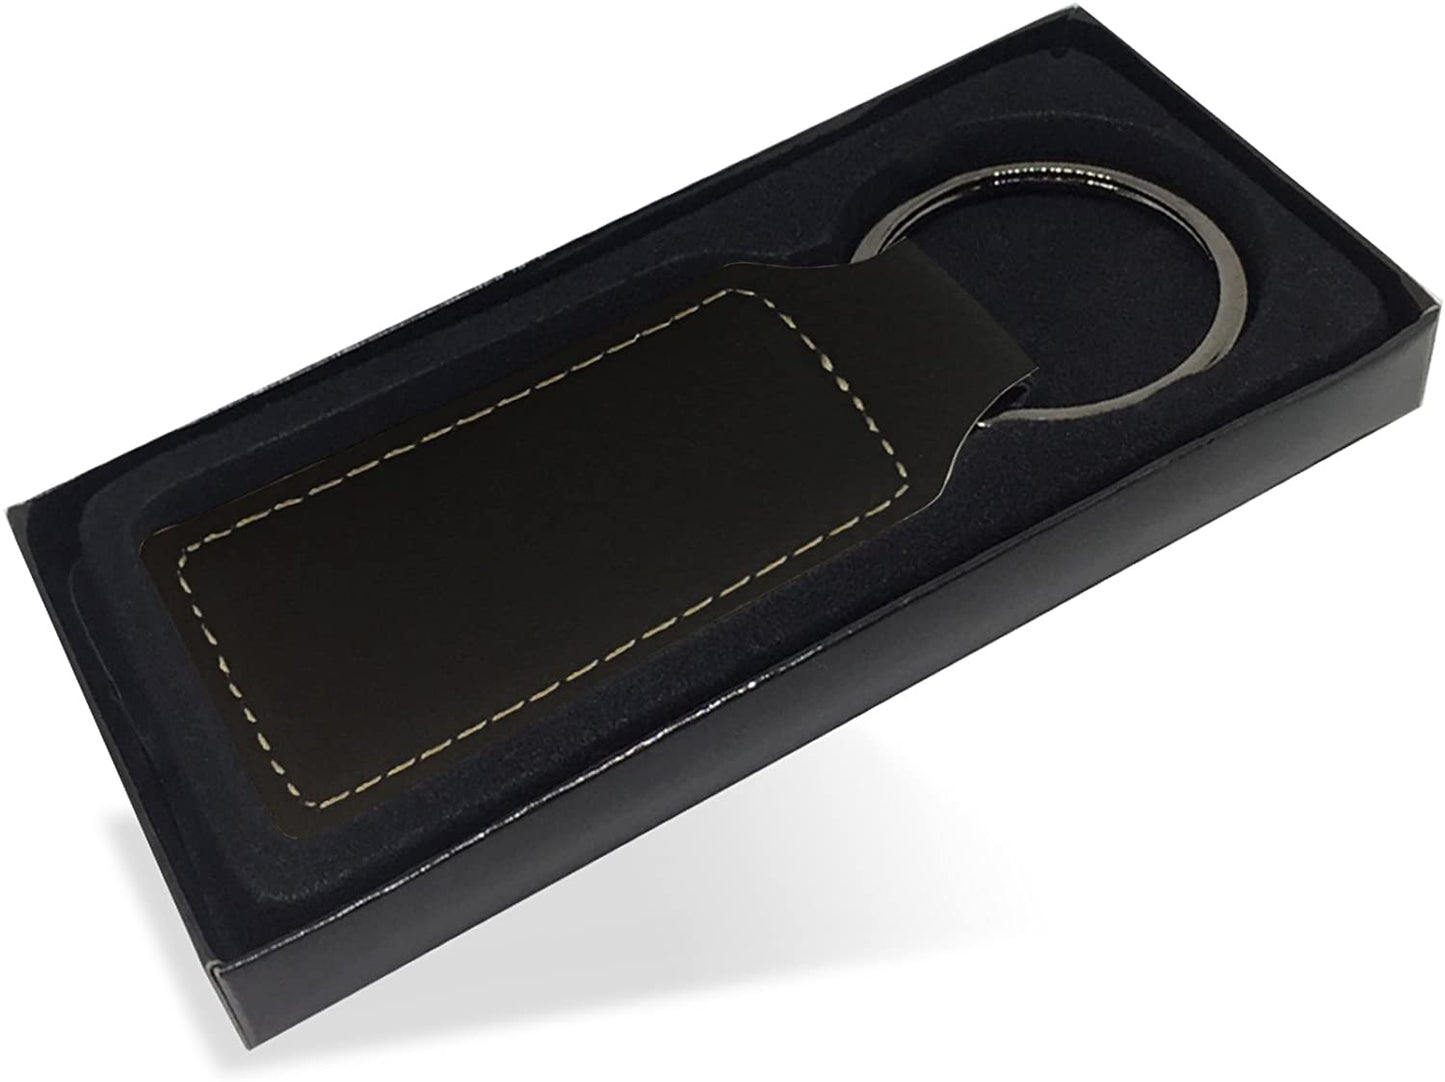 Faux Leather Rectangle Keychain, Grad Cap Class of 2020, 2021, 2022, 2023, 2024, 2025, Personalized Engraving Included